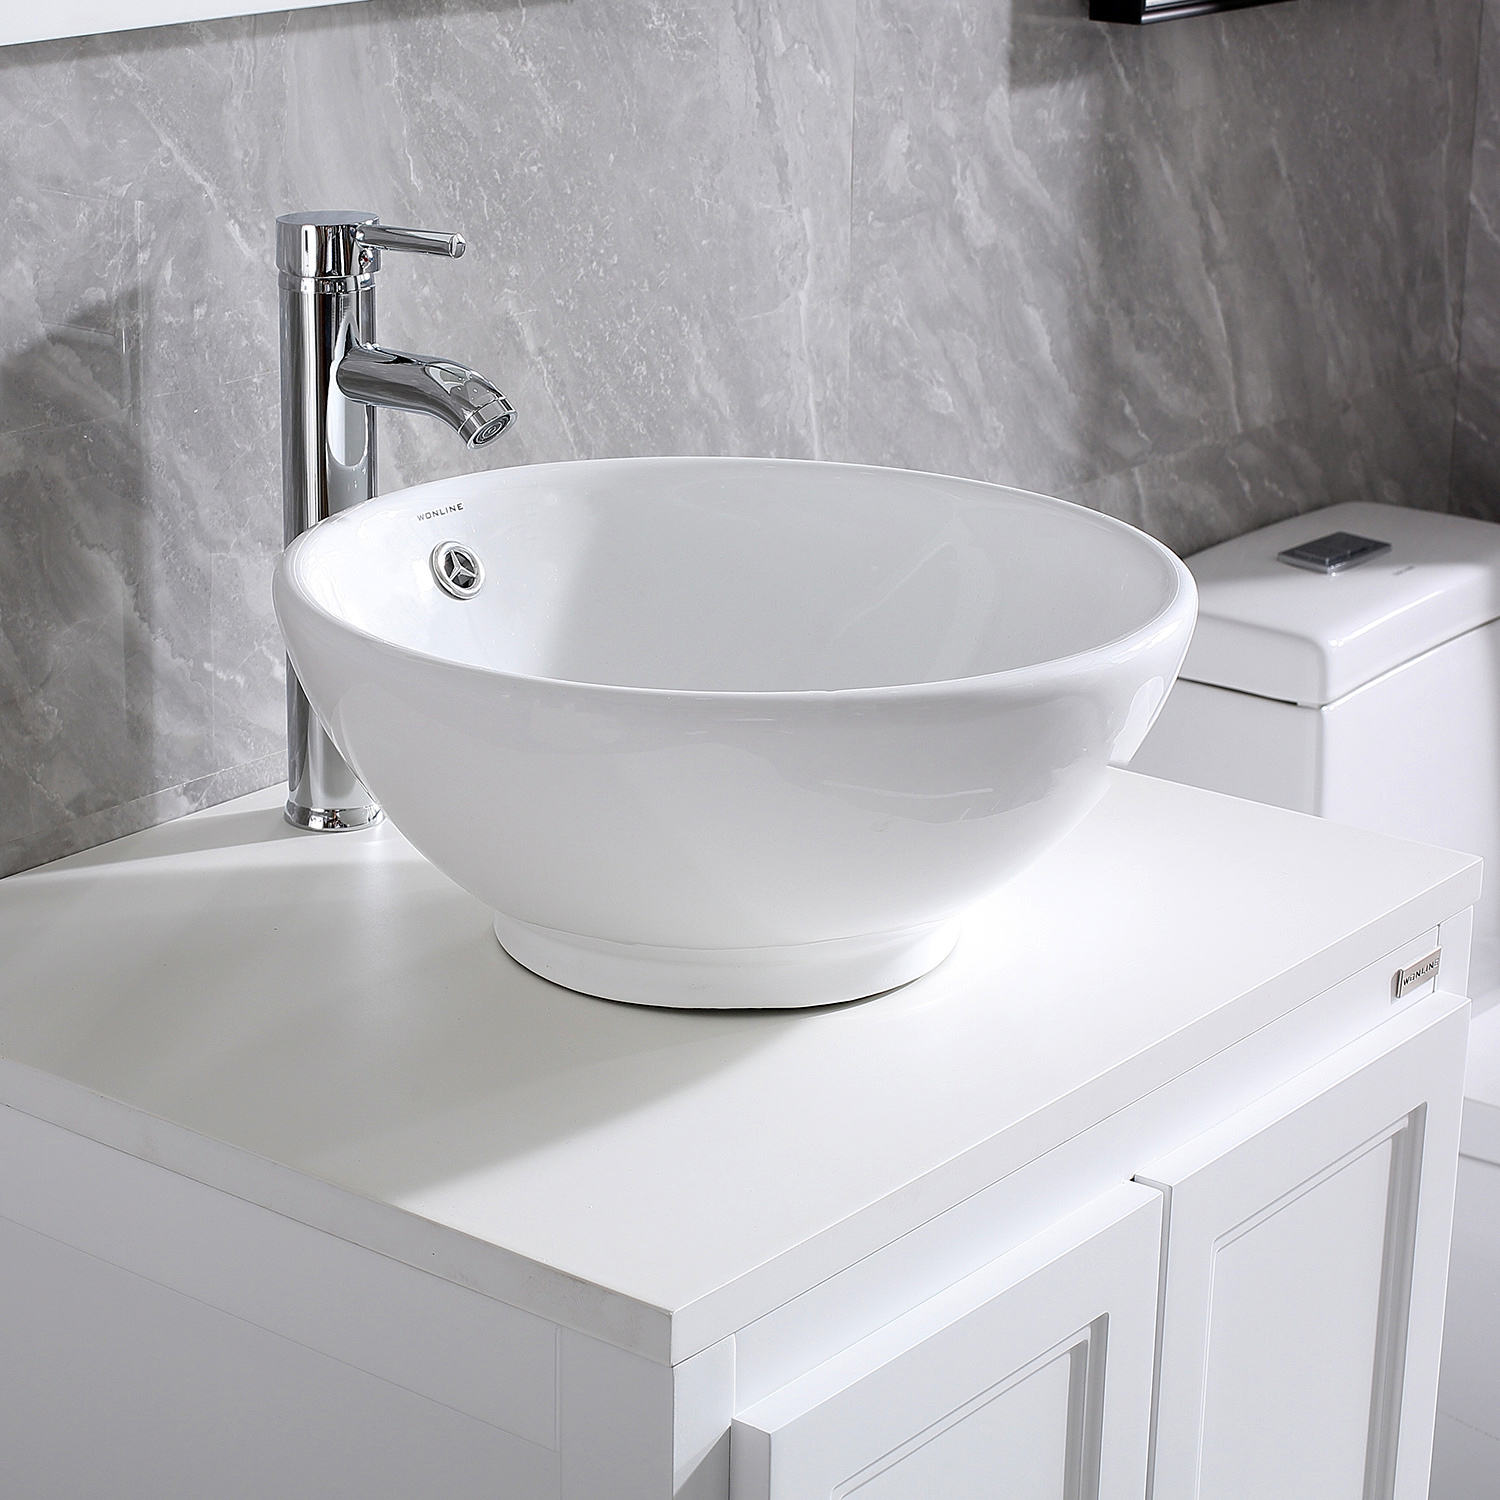 Wonline Round White Porcelain Ceramic Bathroom Vessel Sink with Overflow, Equipped with Chrome Faucet Pop-up Drain Combo - image 1 of 4